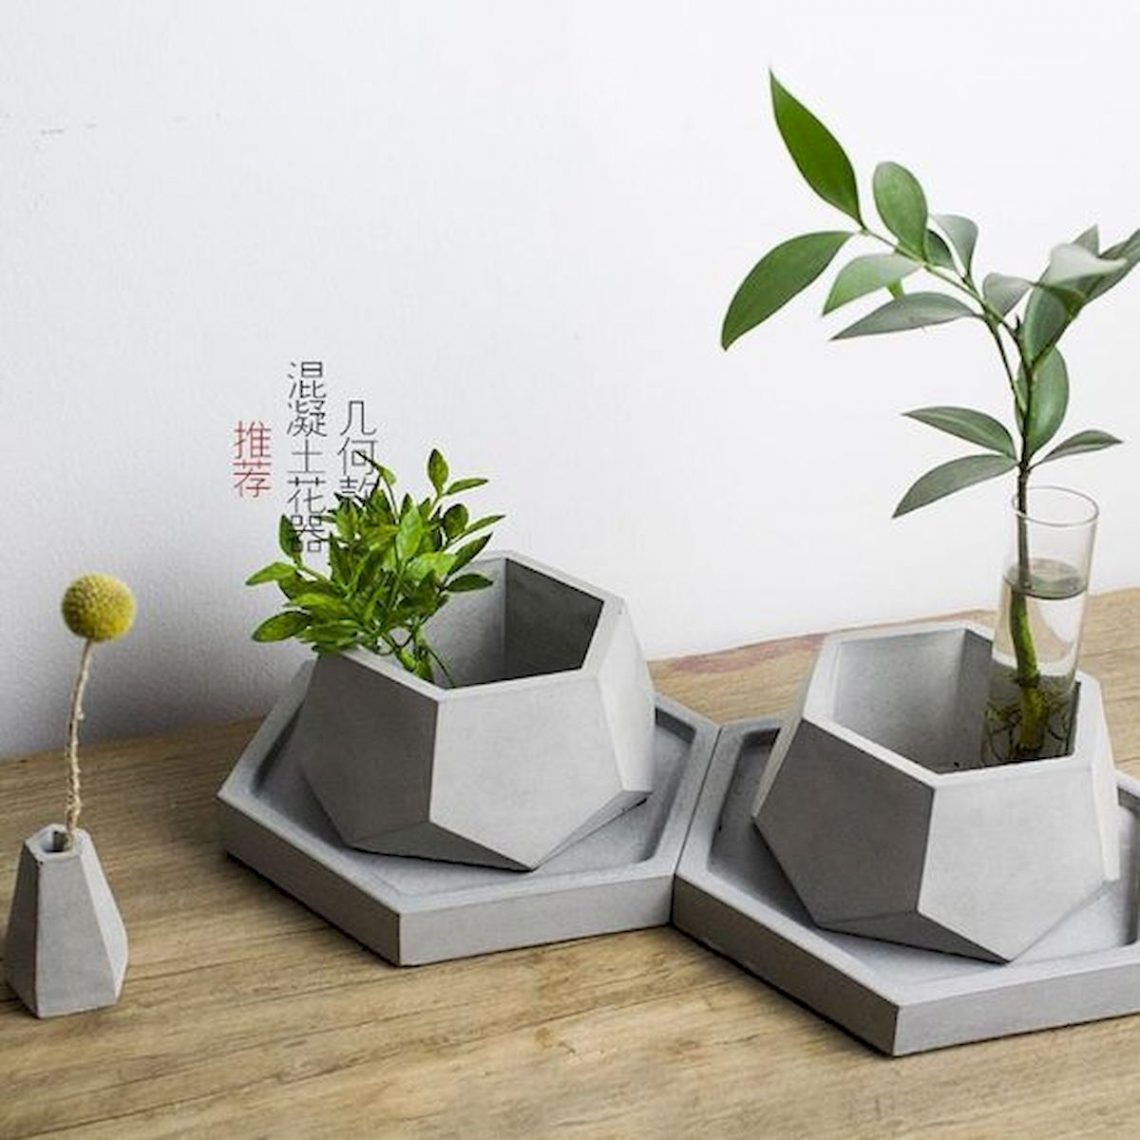 Top 100 Best Concrete Crafts To Pursue - Useful DIY Projects